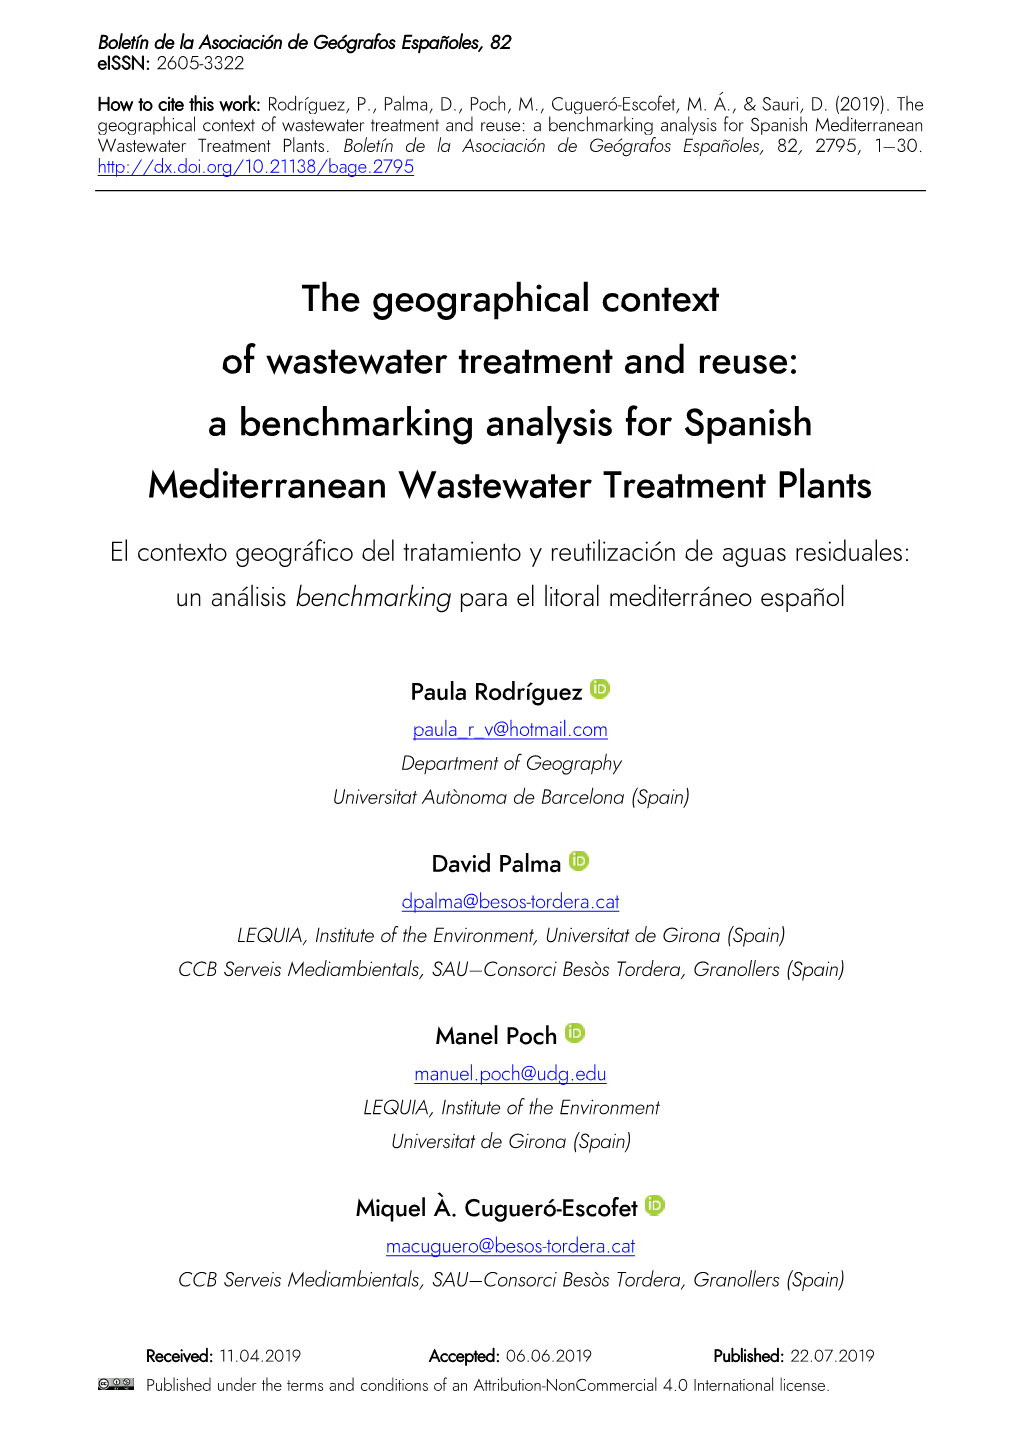 The Geographical Context of Wastewater Treatment and Reuse: a Benchmarking Analysis for Spanish Mediterranean Wastewater Treatment Plants